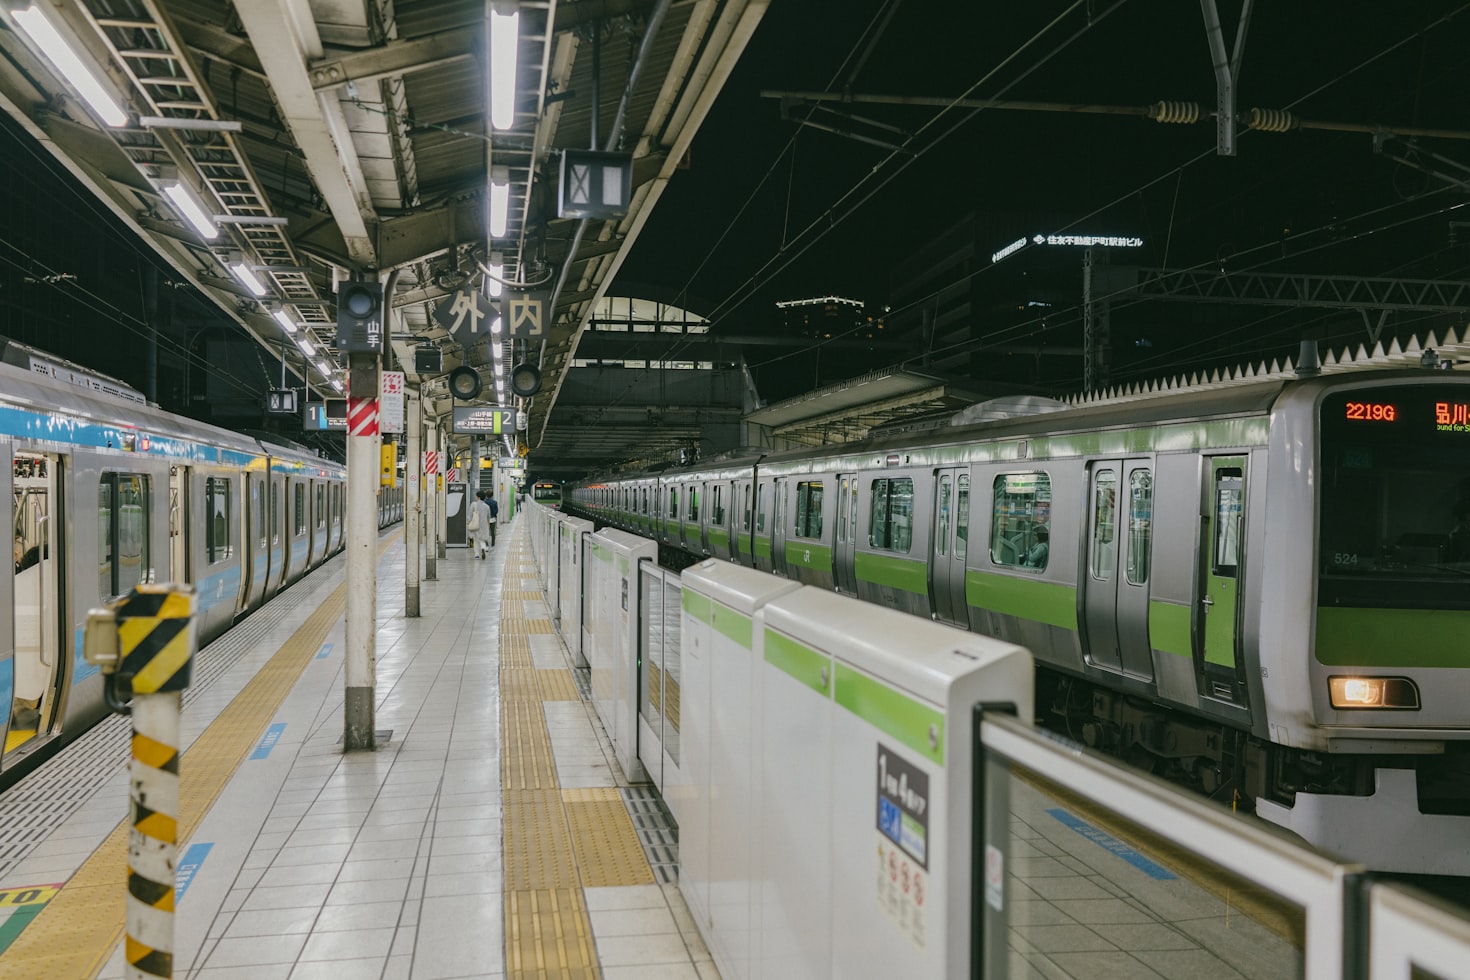 How to Make the Most of Your Time in Japan on a Tight Budget